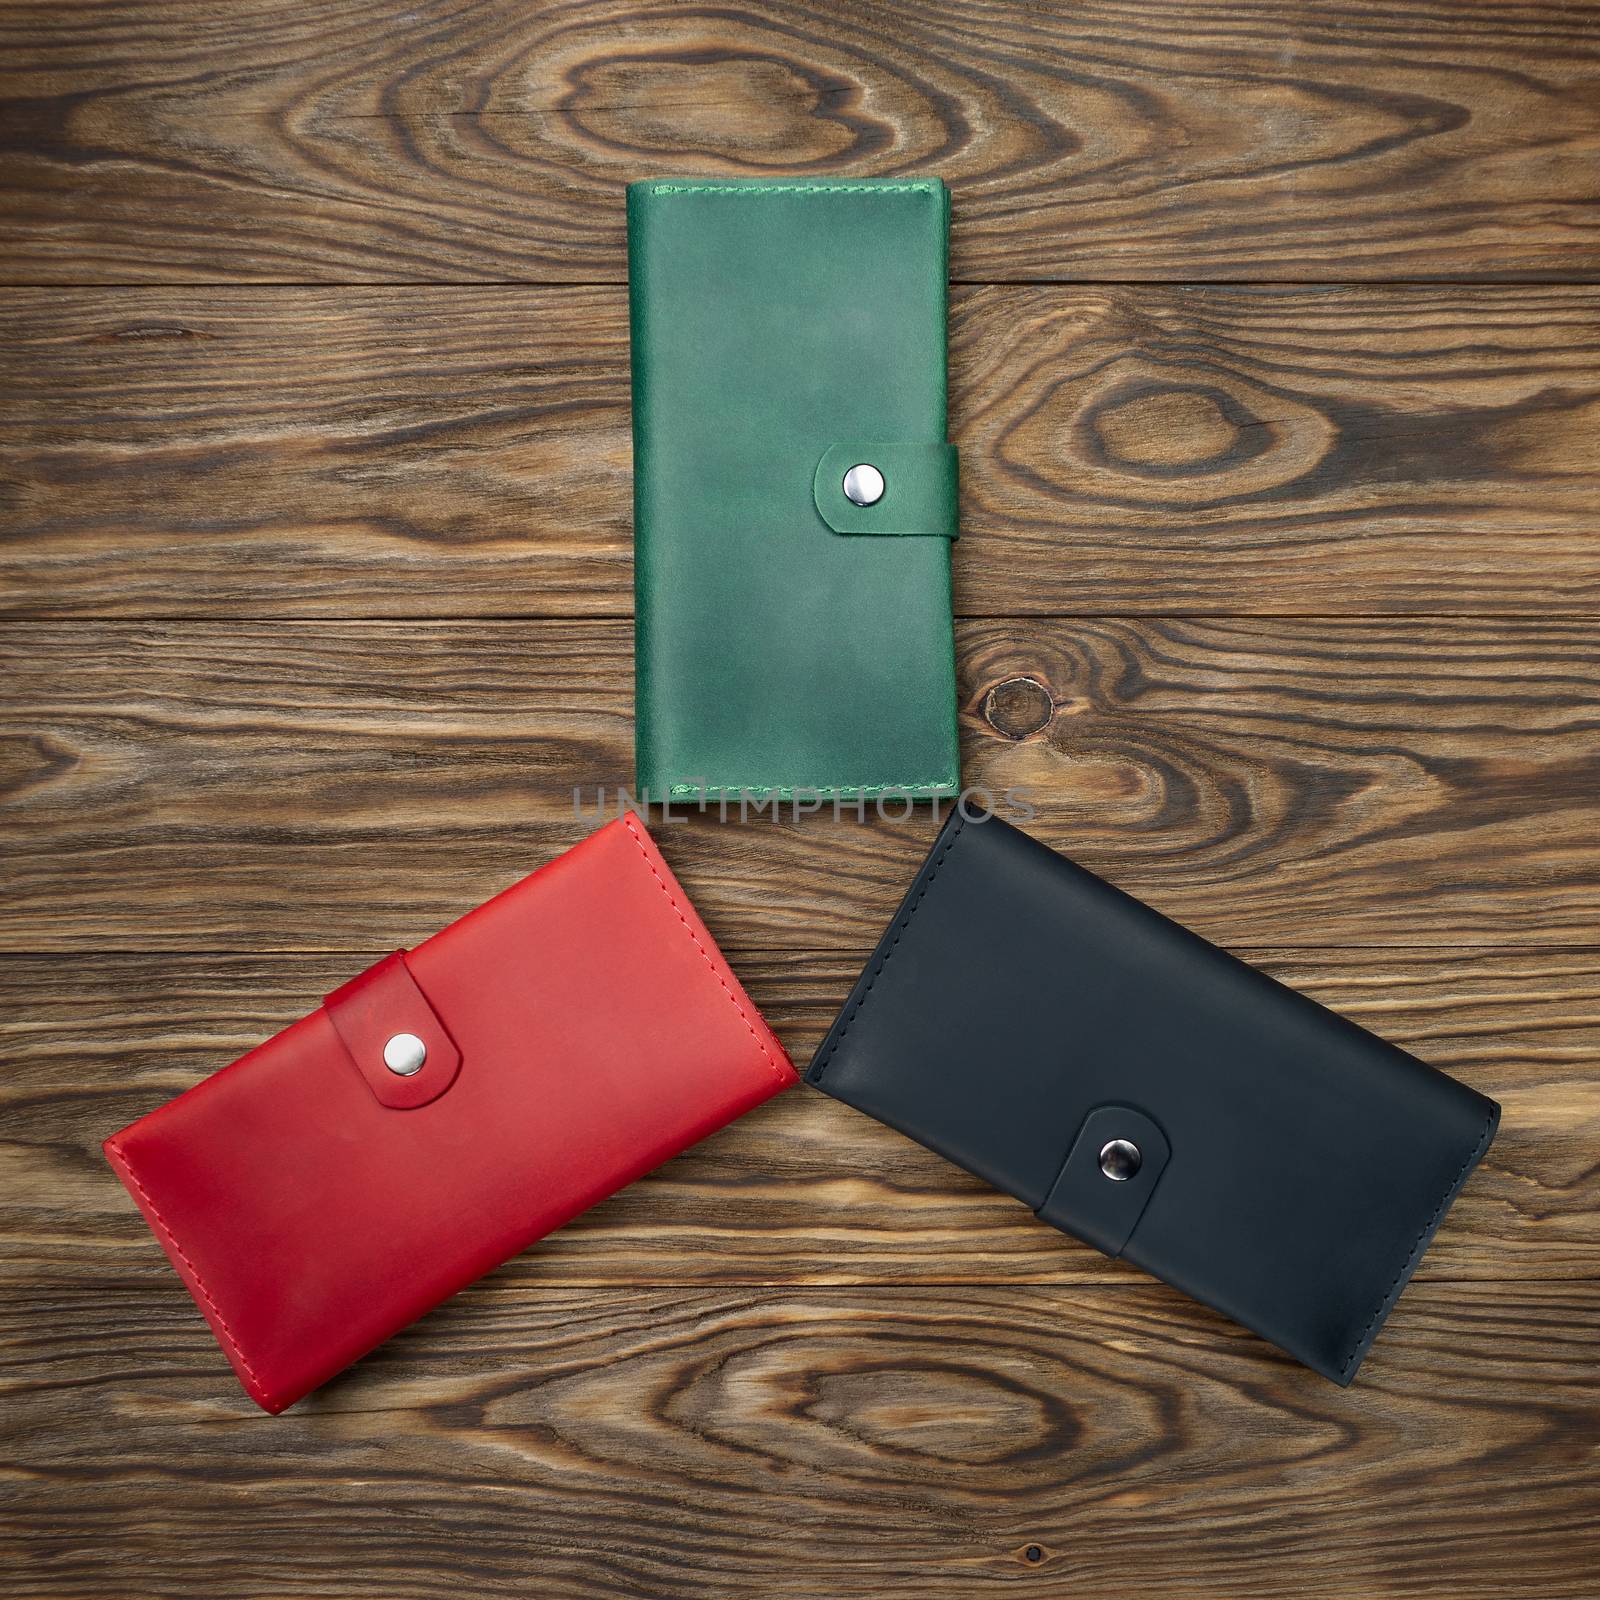 Three handmade leather wallets lies on textured wooden backgroud. Green, red and black wallets up to down view. by alexsdriver